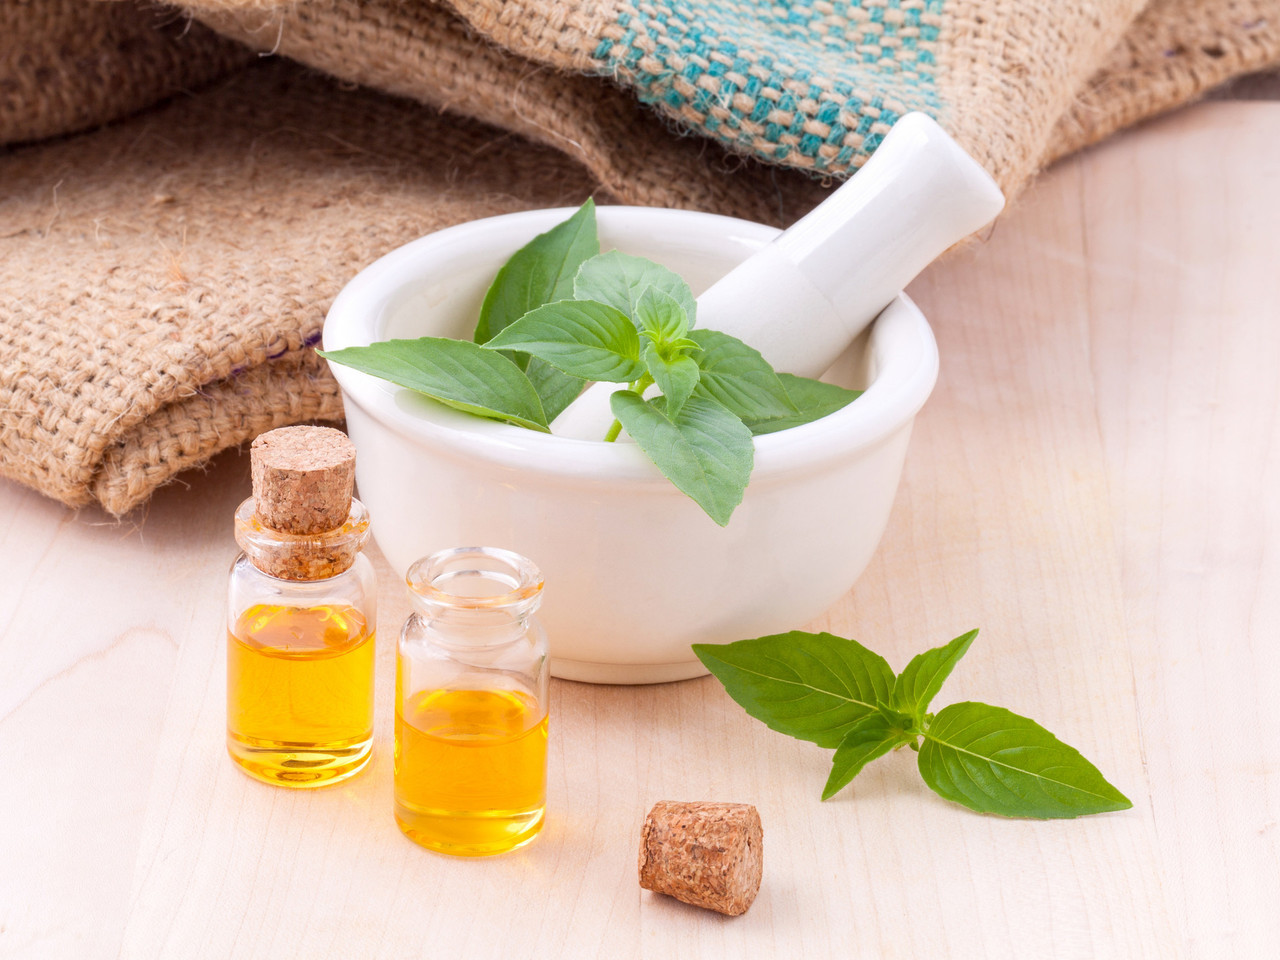 What is green tea oil? What are the effects and effects of green tea oil?